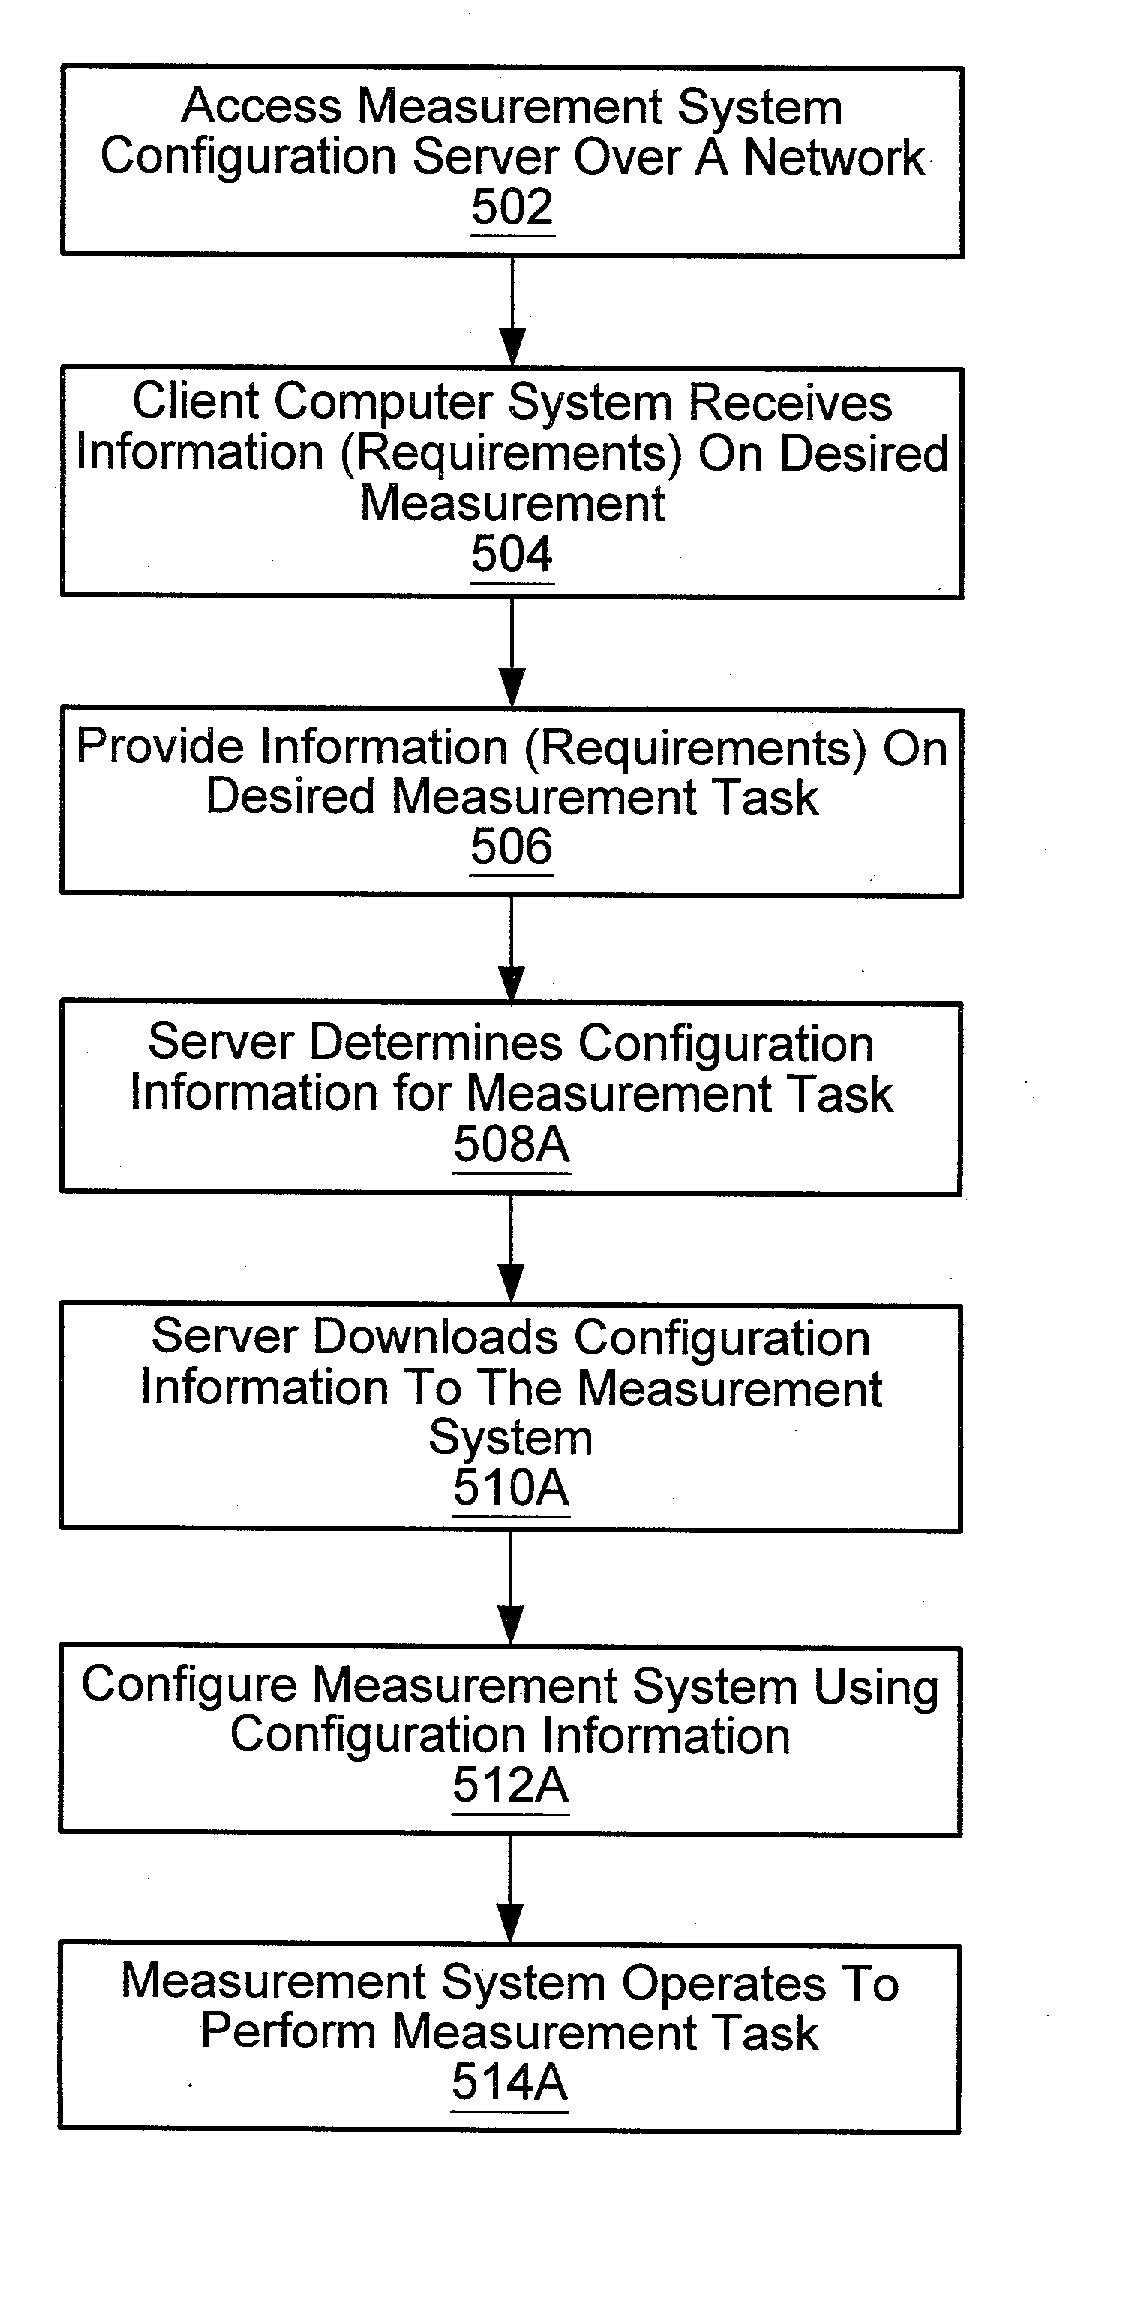 Network-based system for configuring a measurement system using configuration information generated based on a user specification